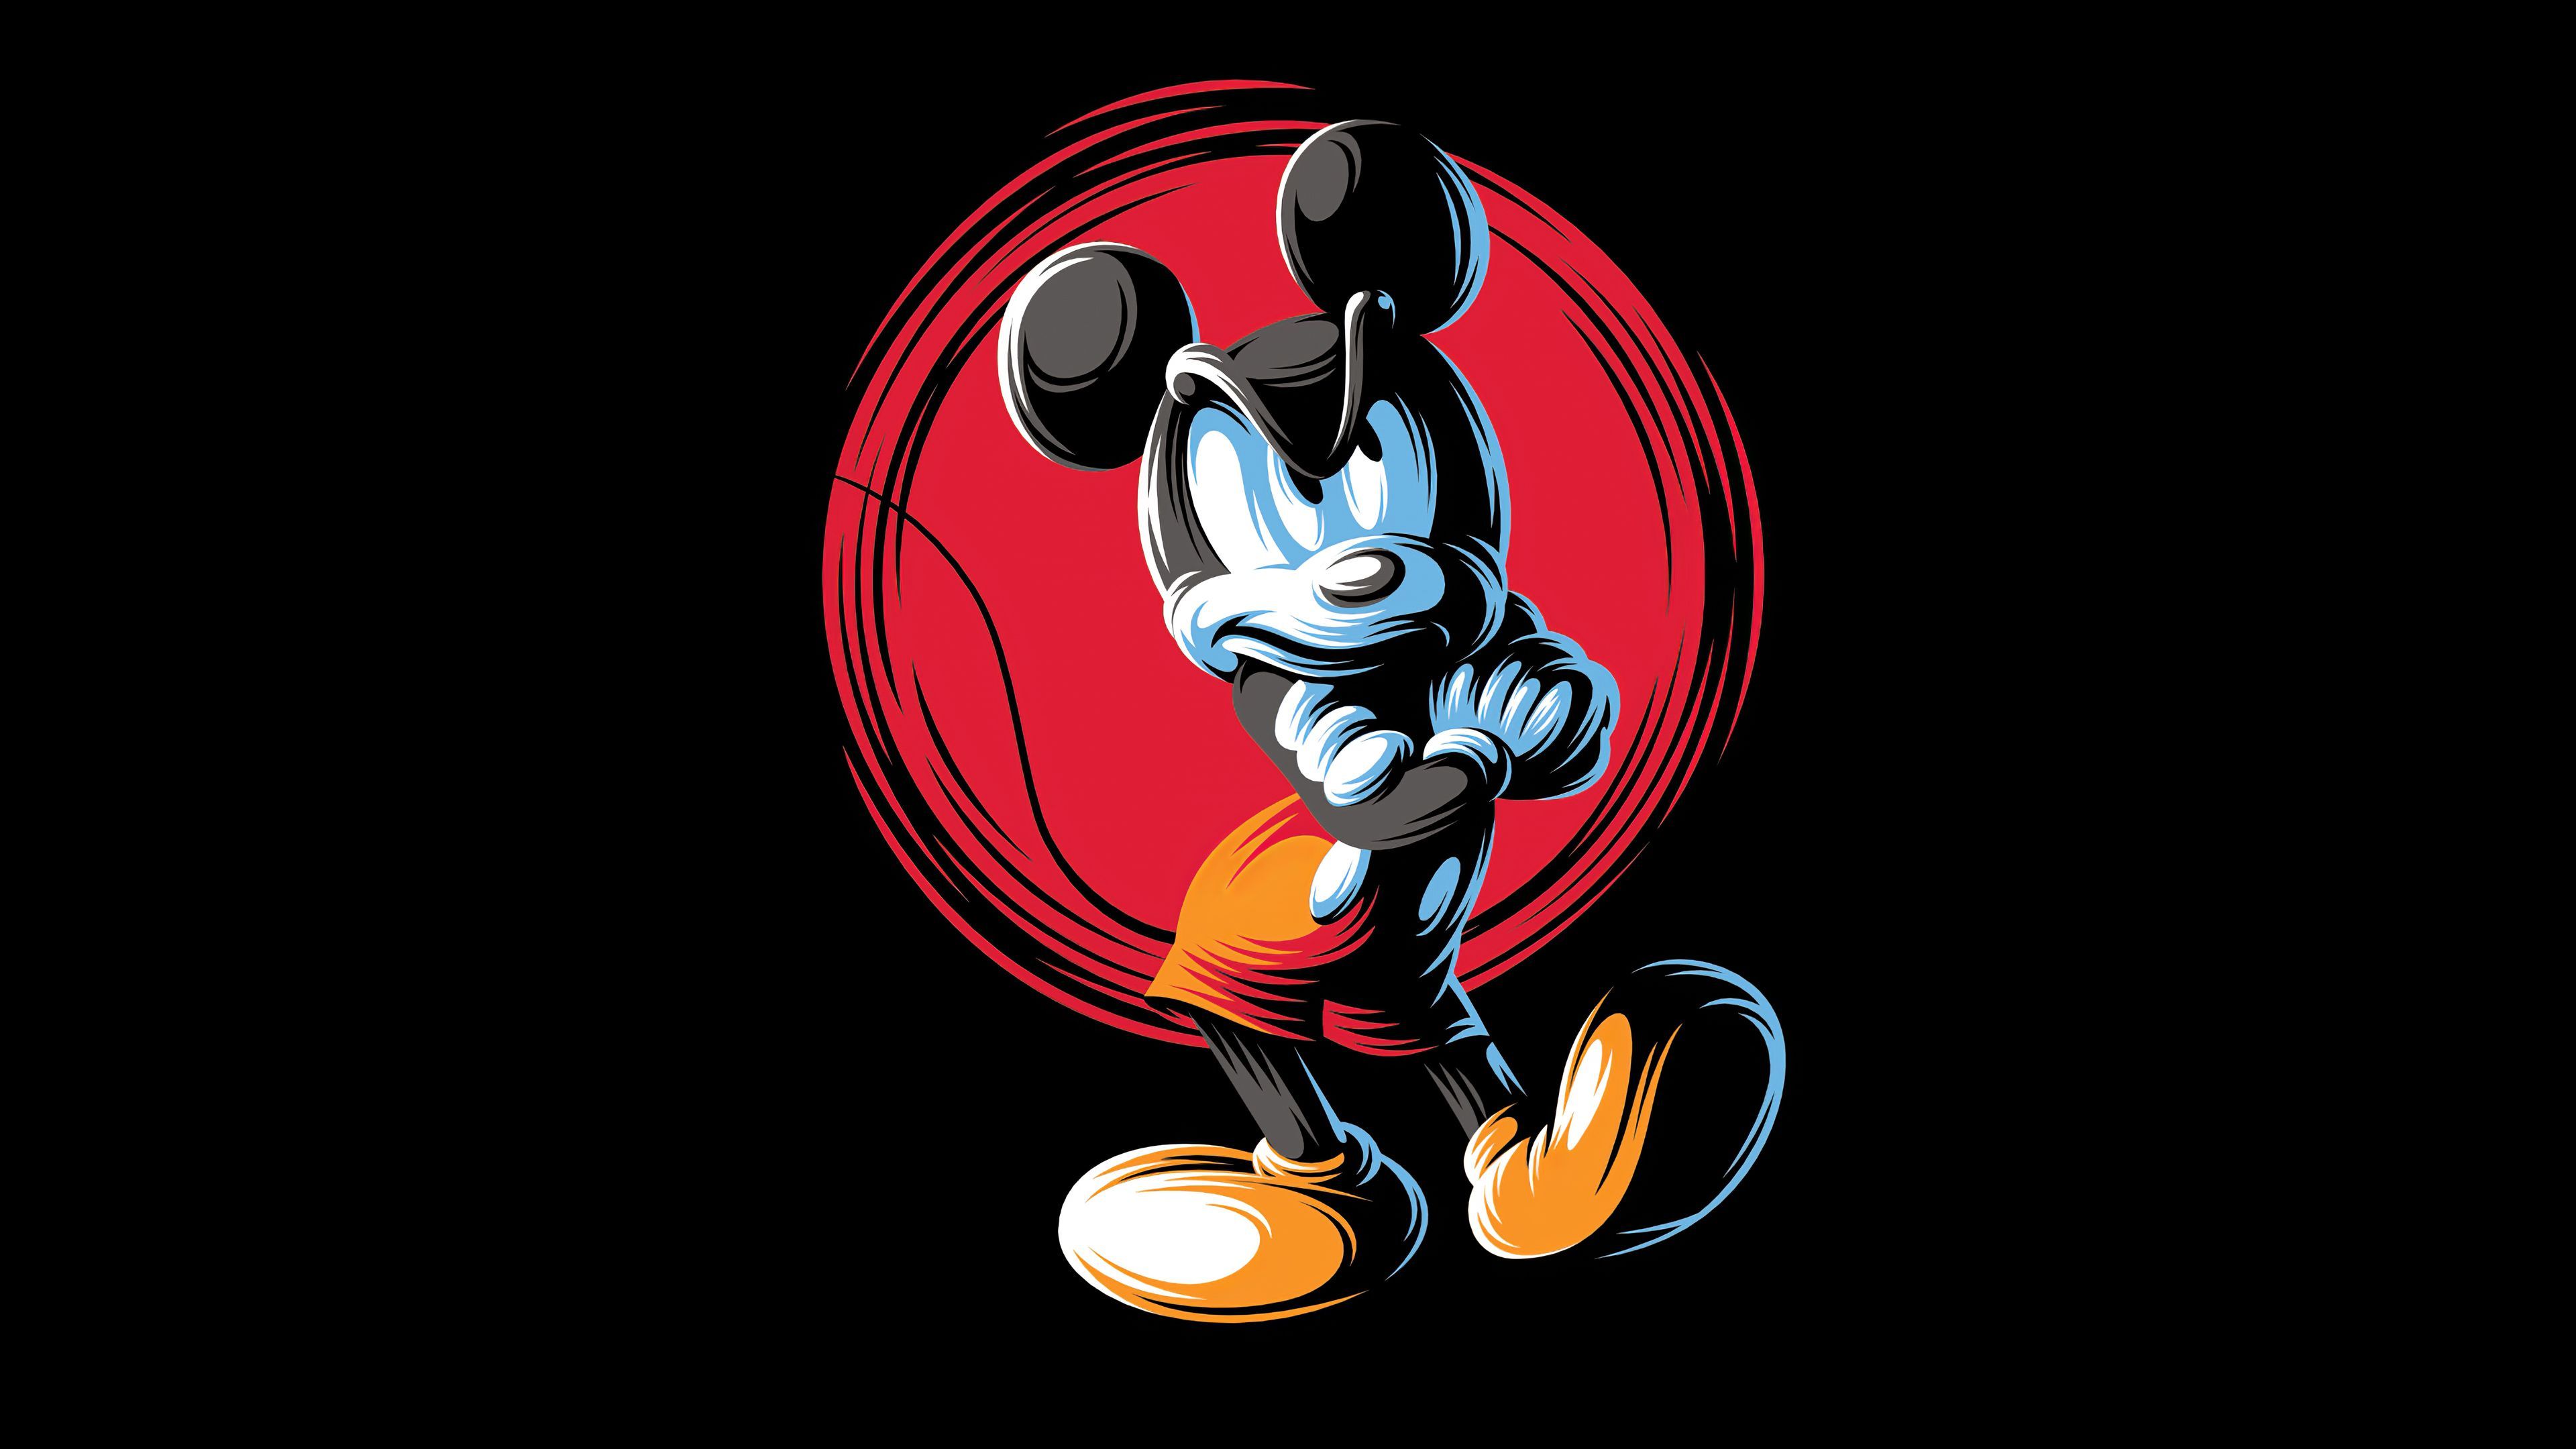 mickey mouse obey wallpaper